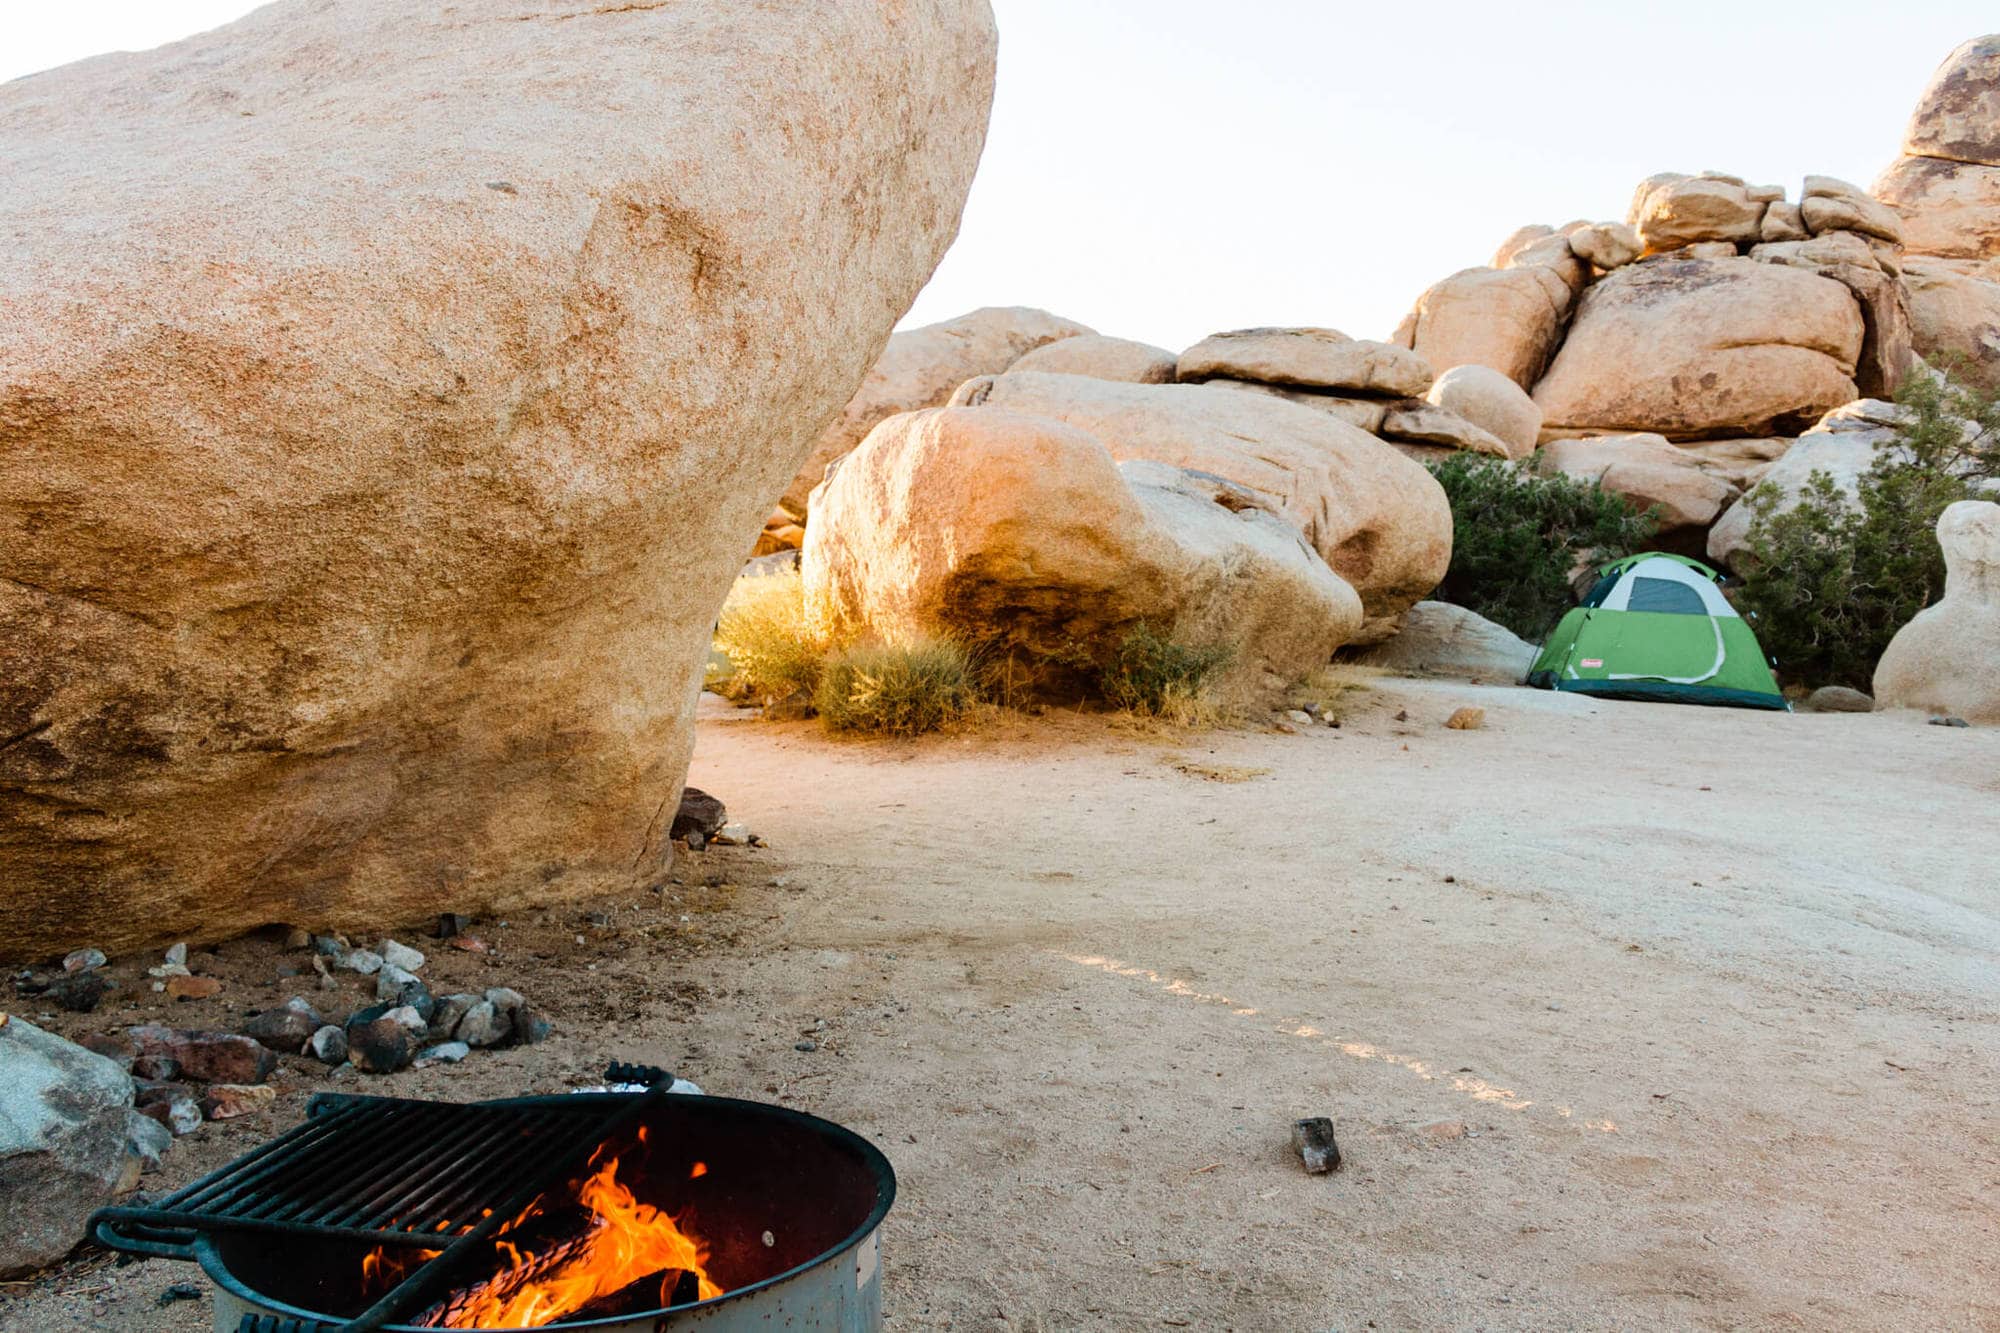 If you're planning an elopement in Joshua Tree National Park, then this is the guide is made for you. Here’s everything you need to know about planning a desert elopement.